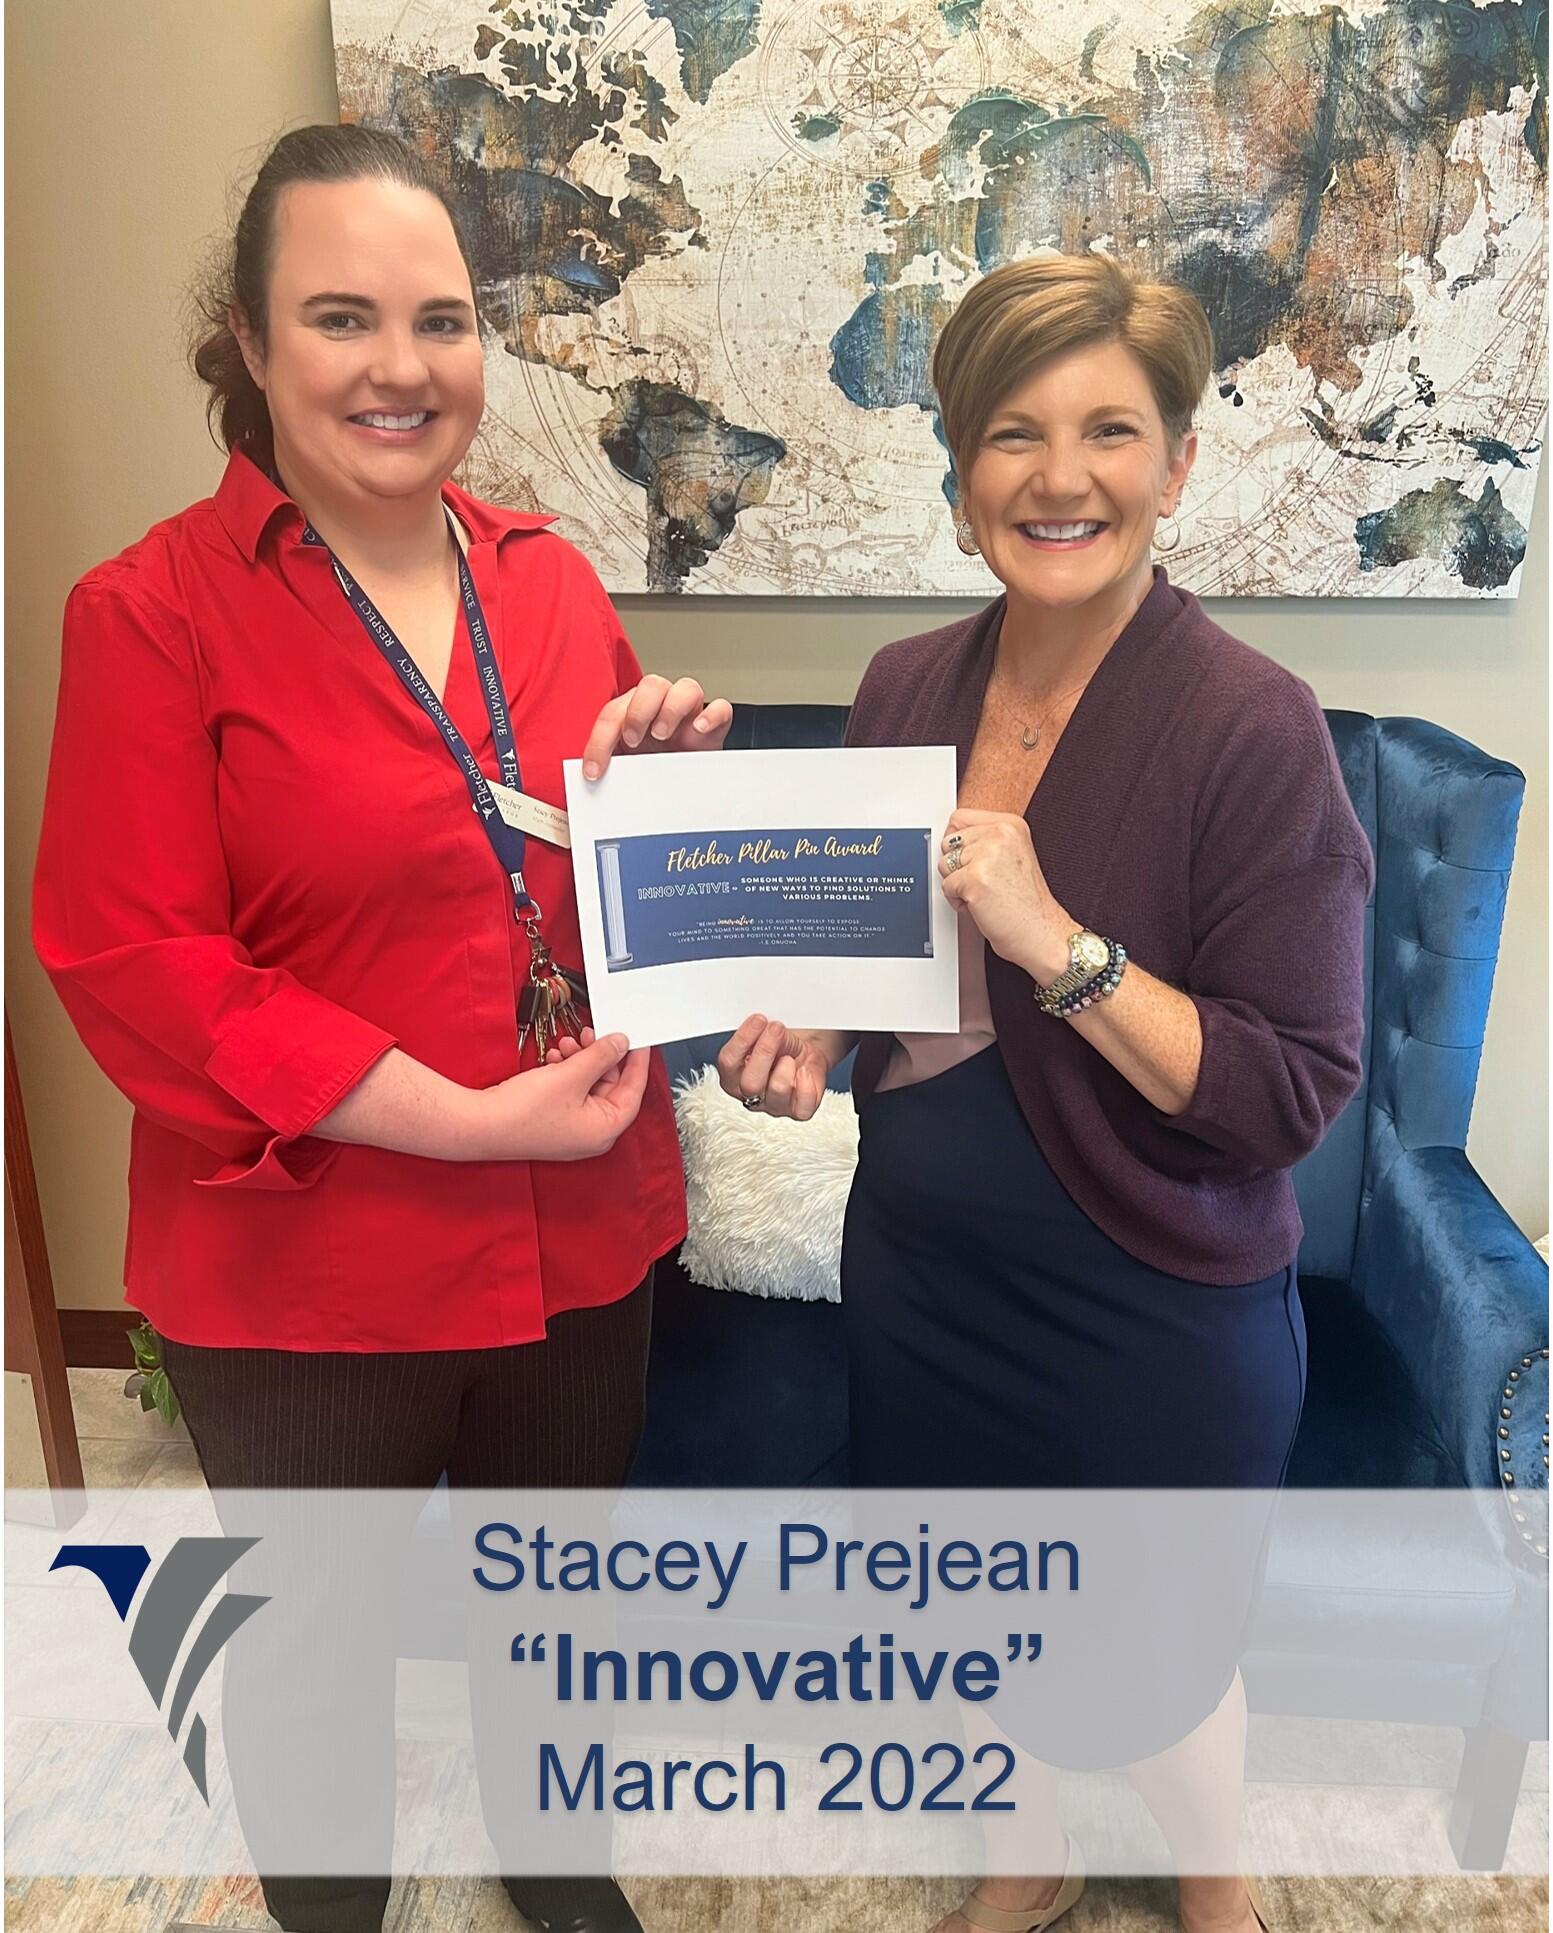 Stacey-Prejean-March-2022-Innovative